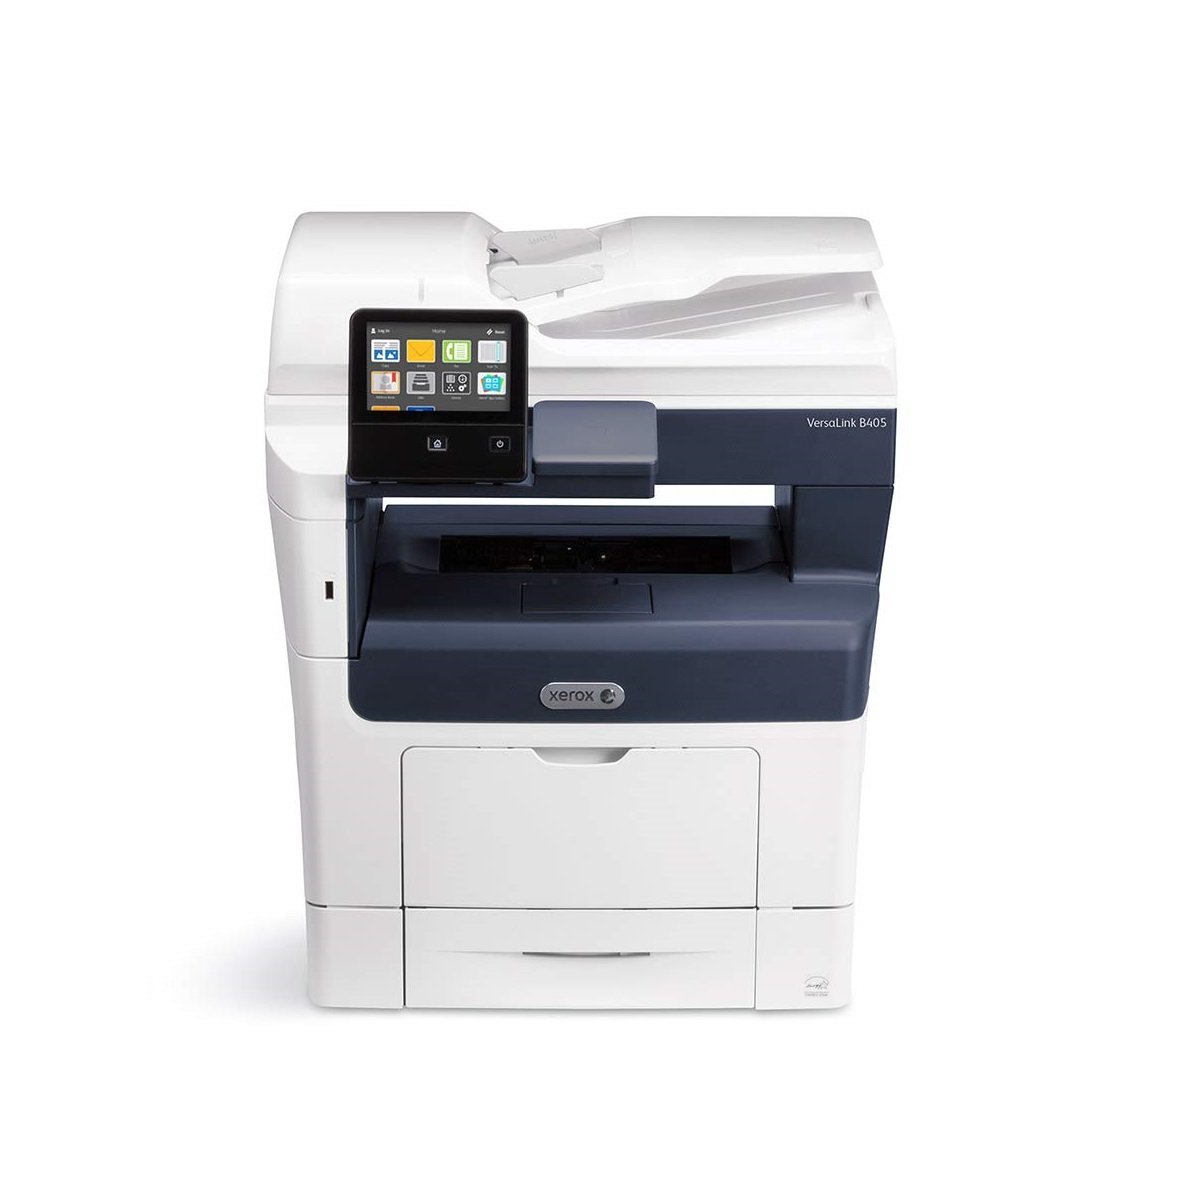 Xerox VersaLink B405 B/W Monochrome Multifunction Printer Copier Scanner, Fax with support for Letter/Legal For Office